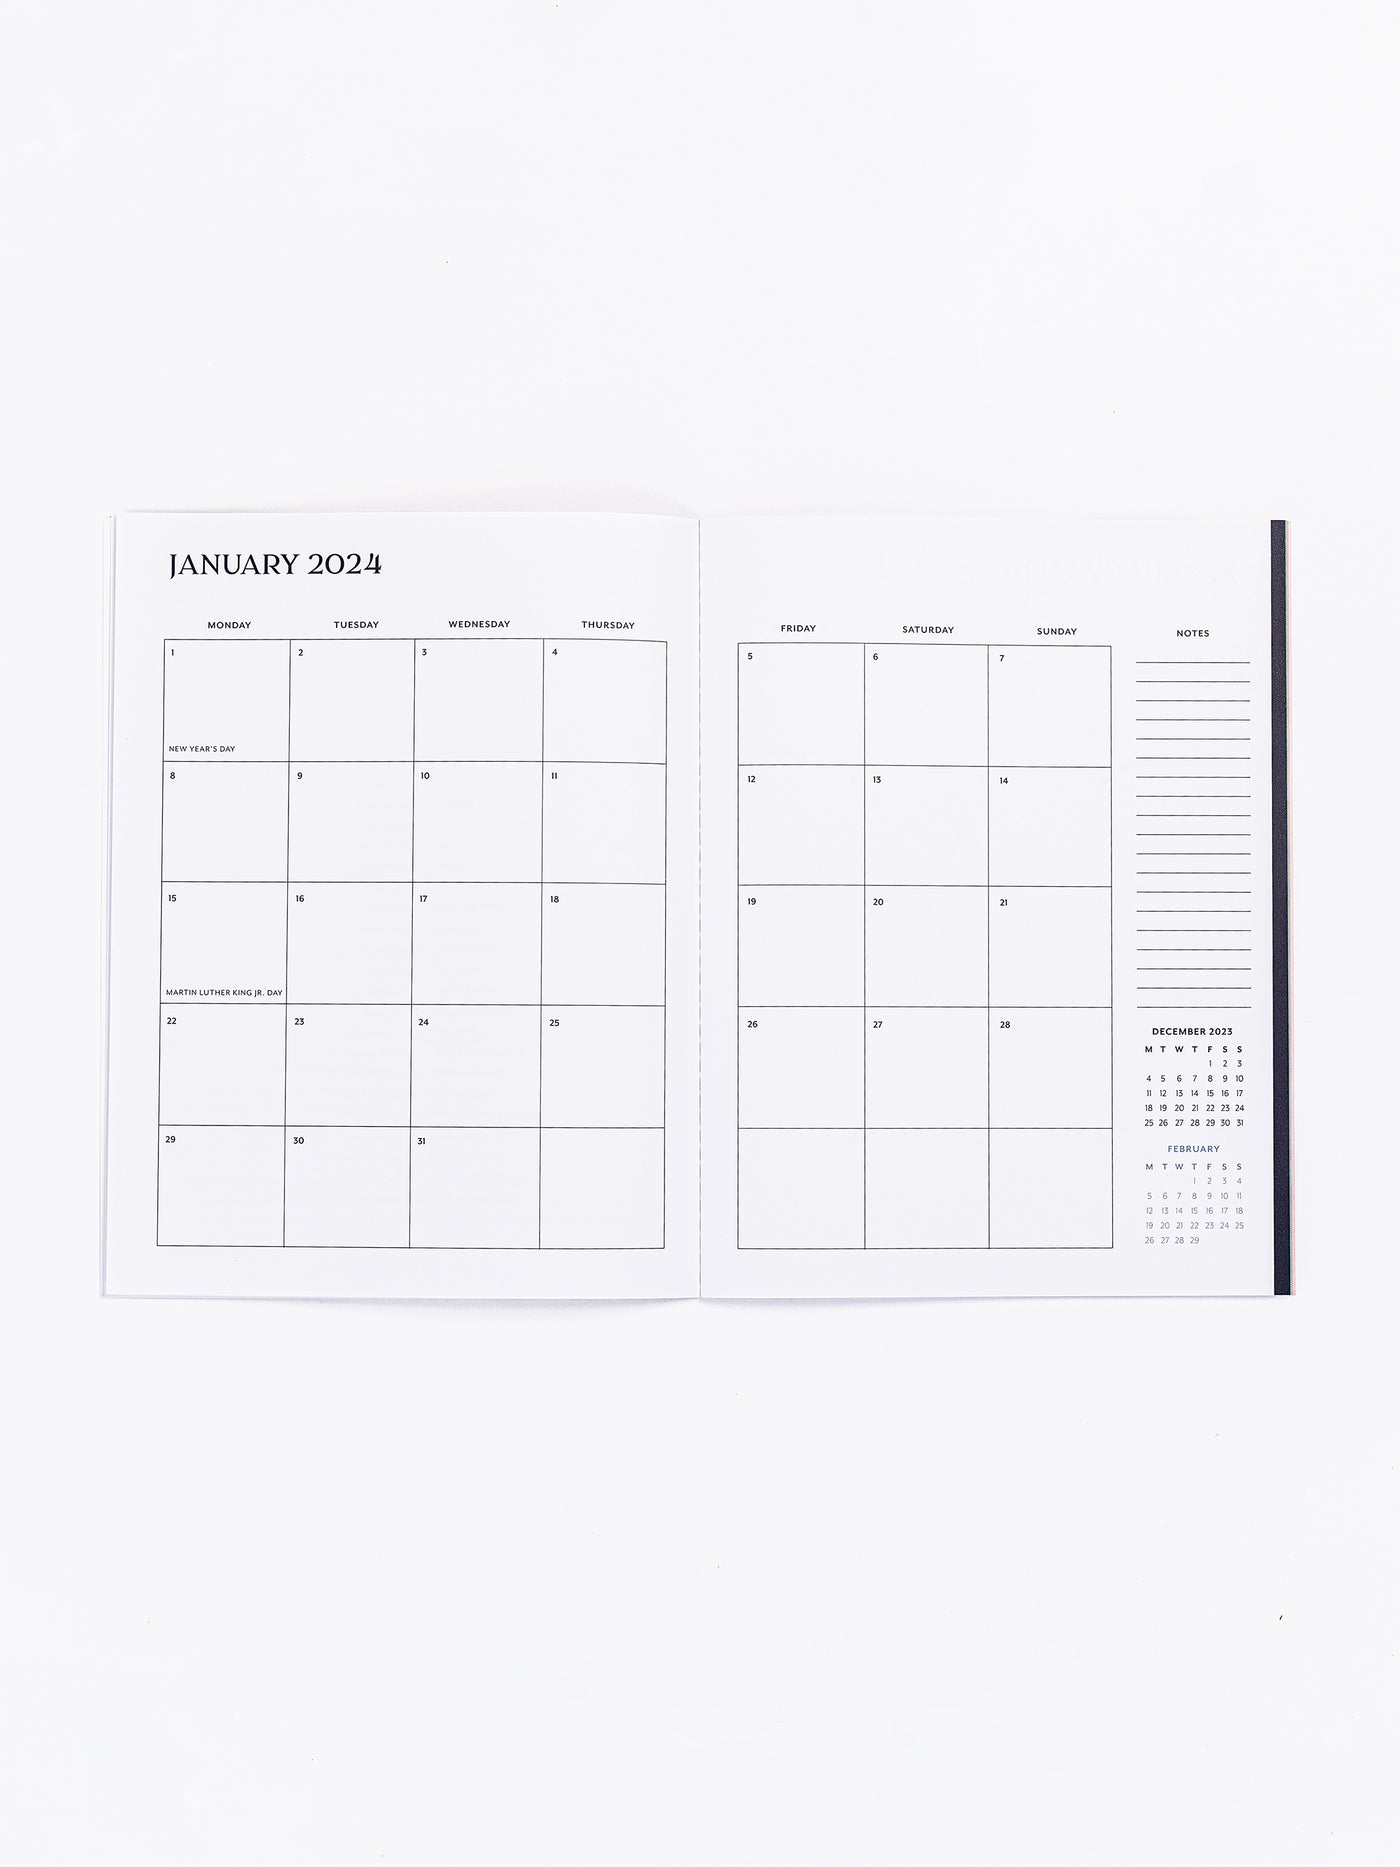 2024 Large Monthly Planner | Little Star Blue